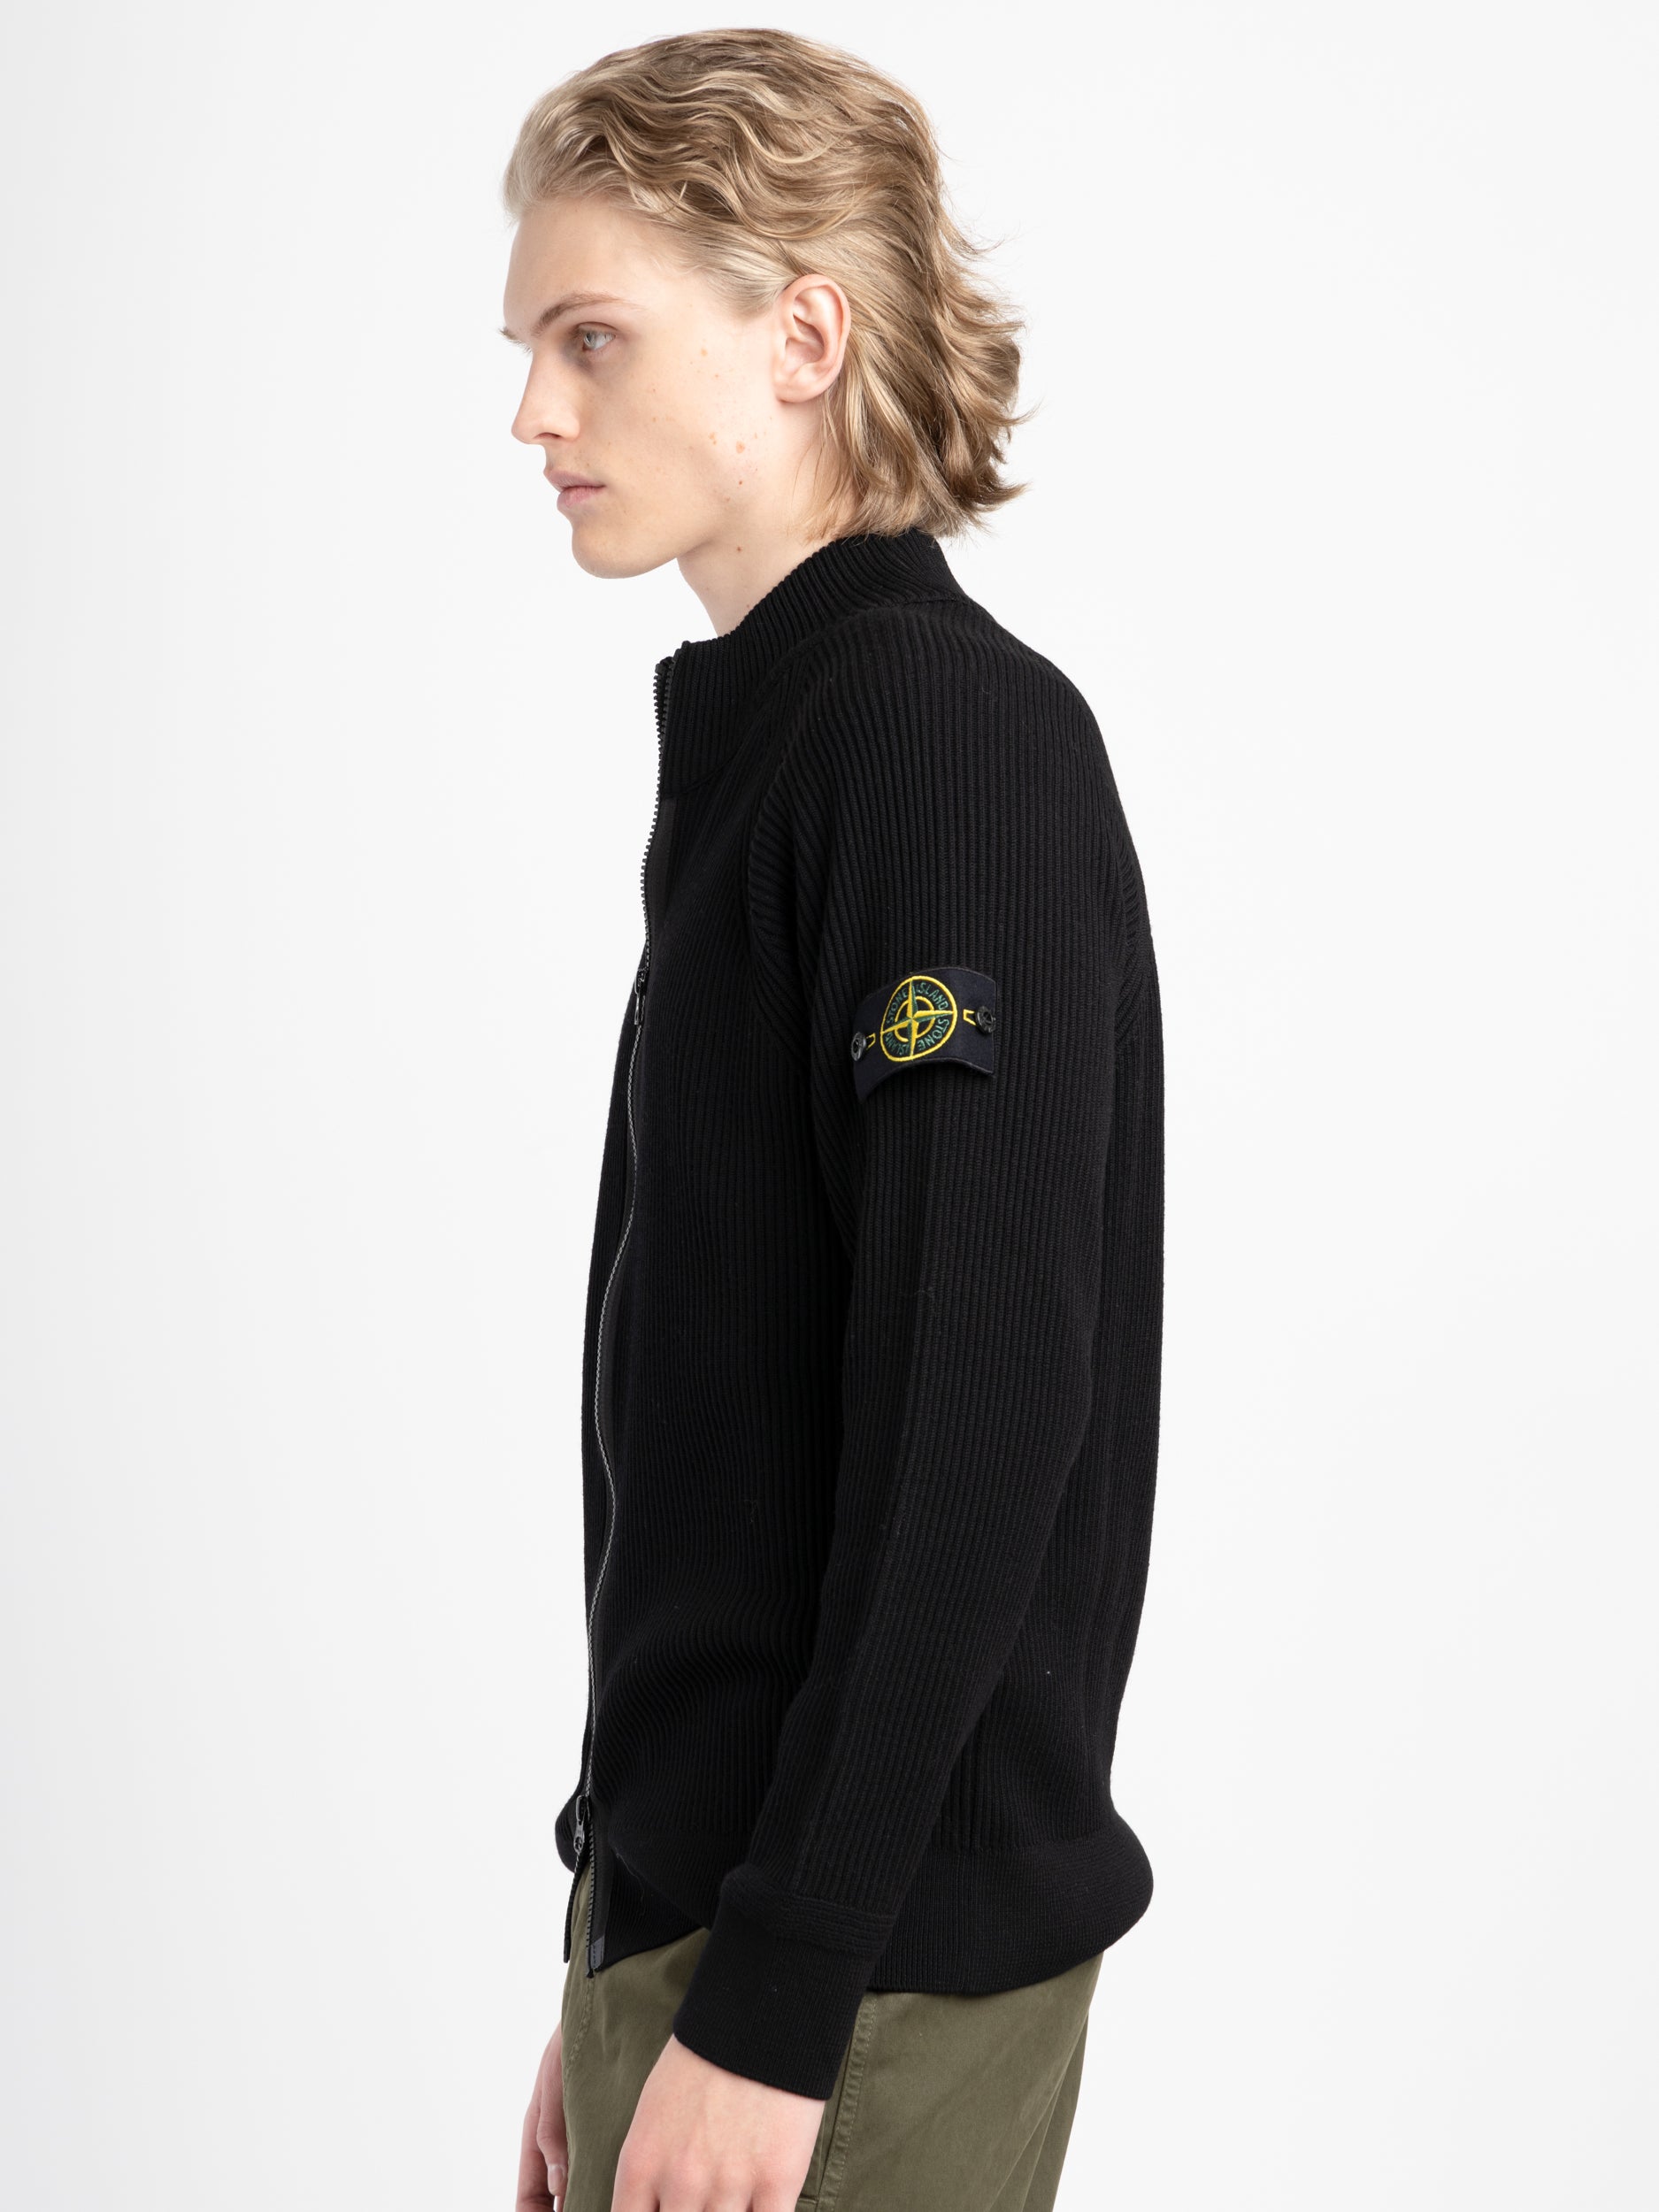 Black Two-Way Full Zipper Knit Jacket – The Helm Clothing